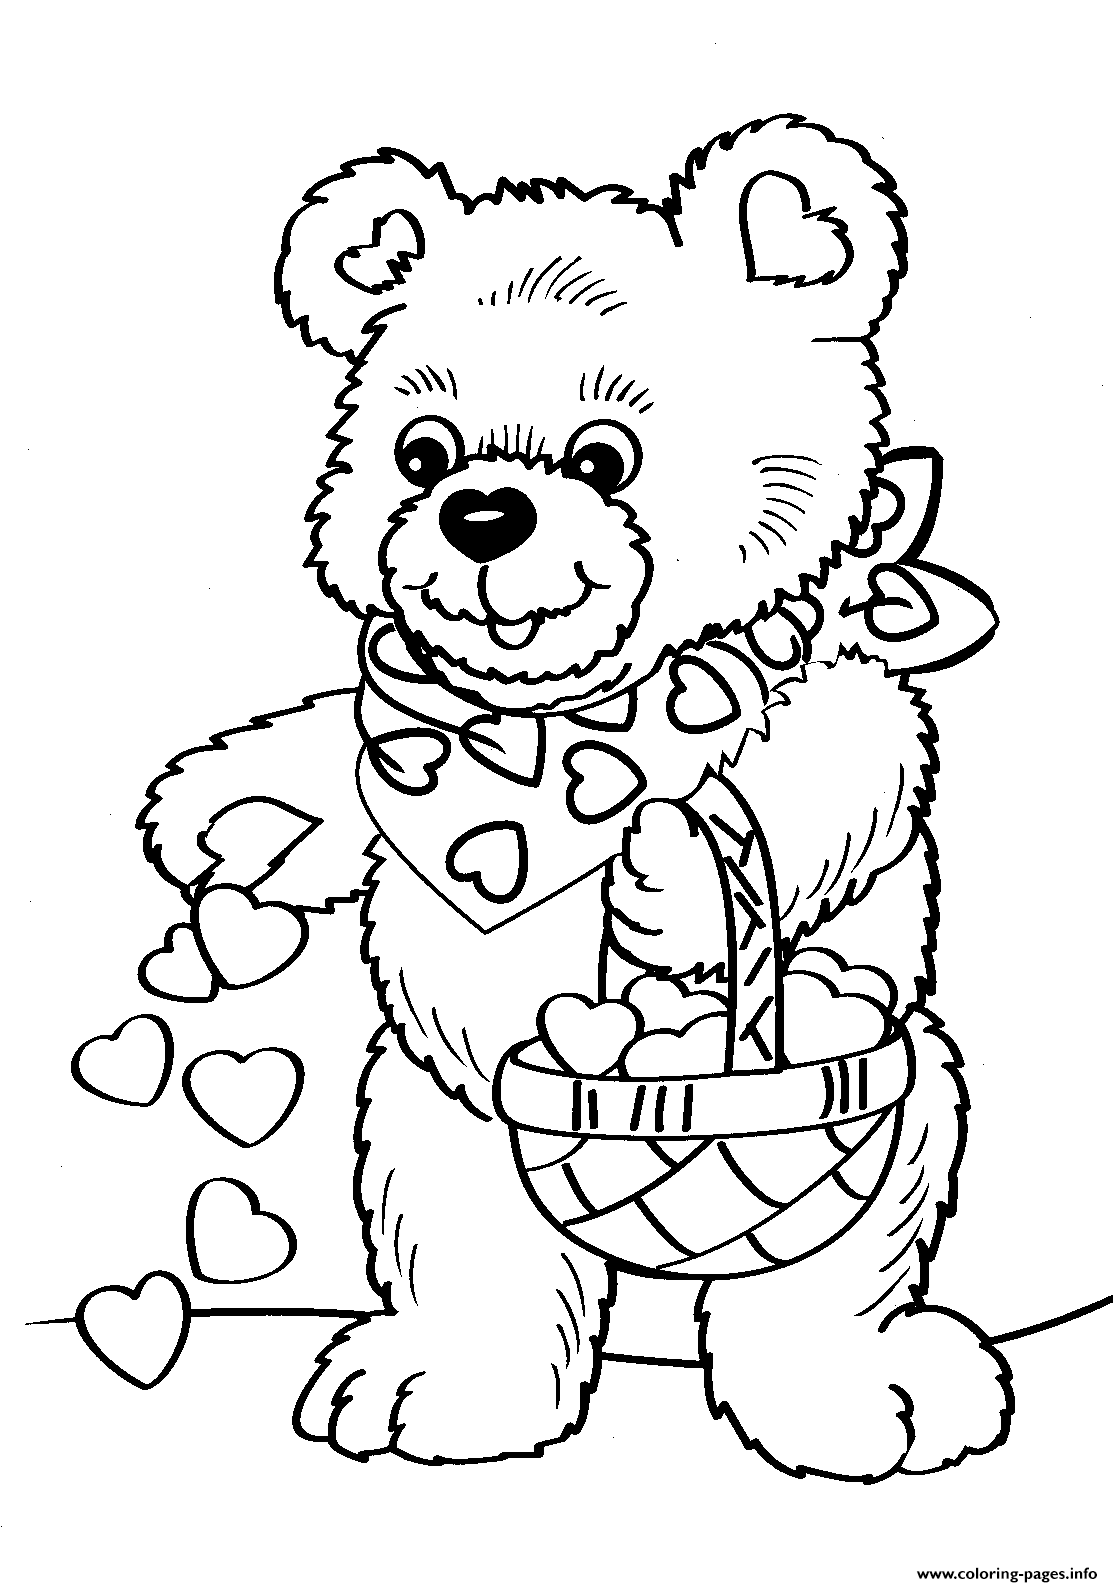 Valentines Day Teddy Bear coloring